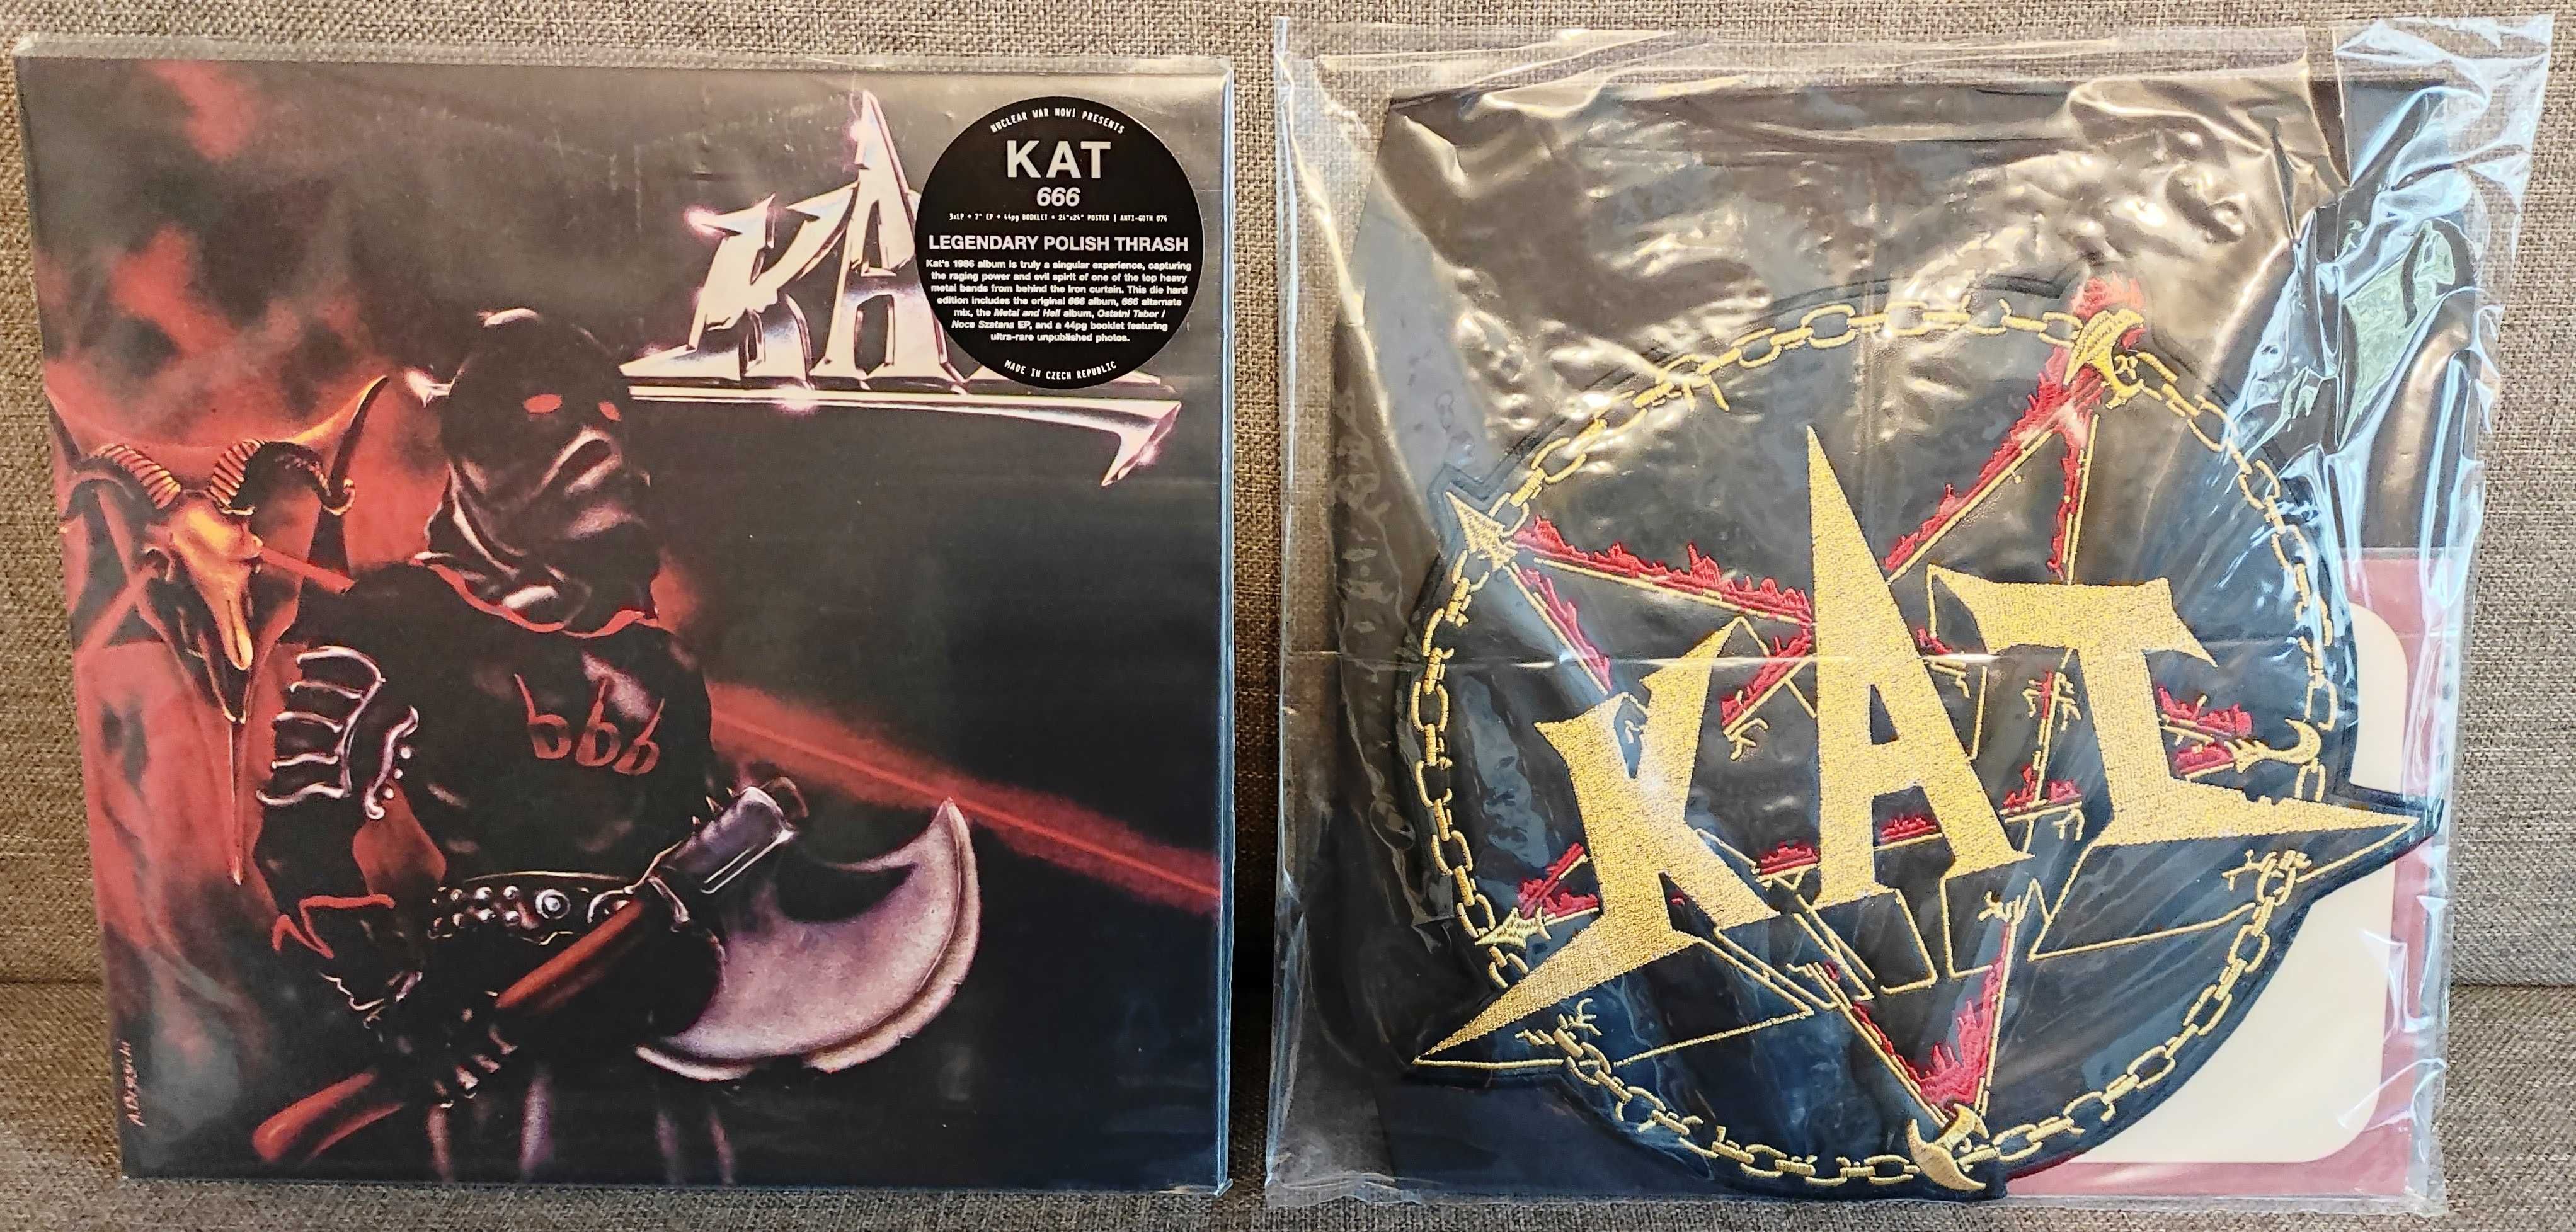 KAT 666 Metall and Hell Die Hard Edition 3x LP + 7" NWN! NOWA SOLD OUT